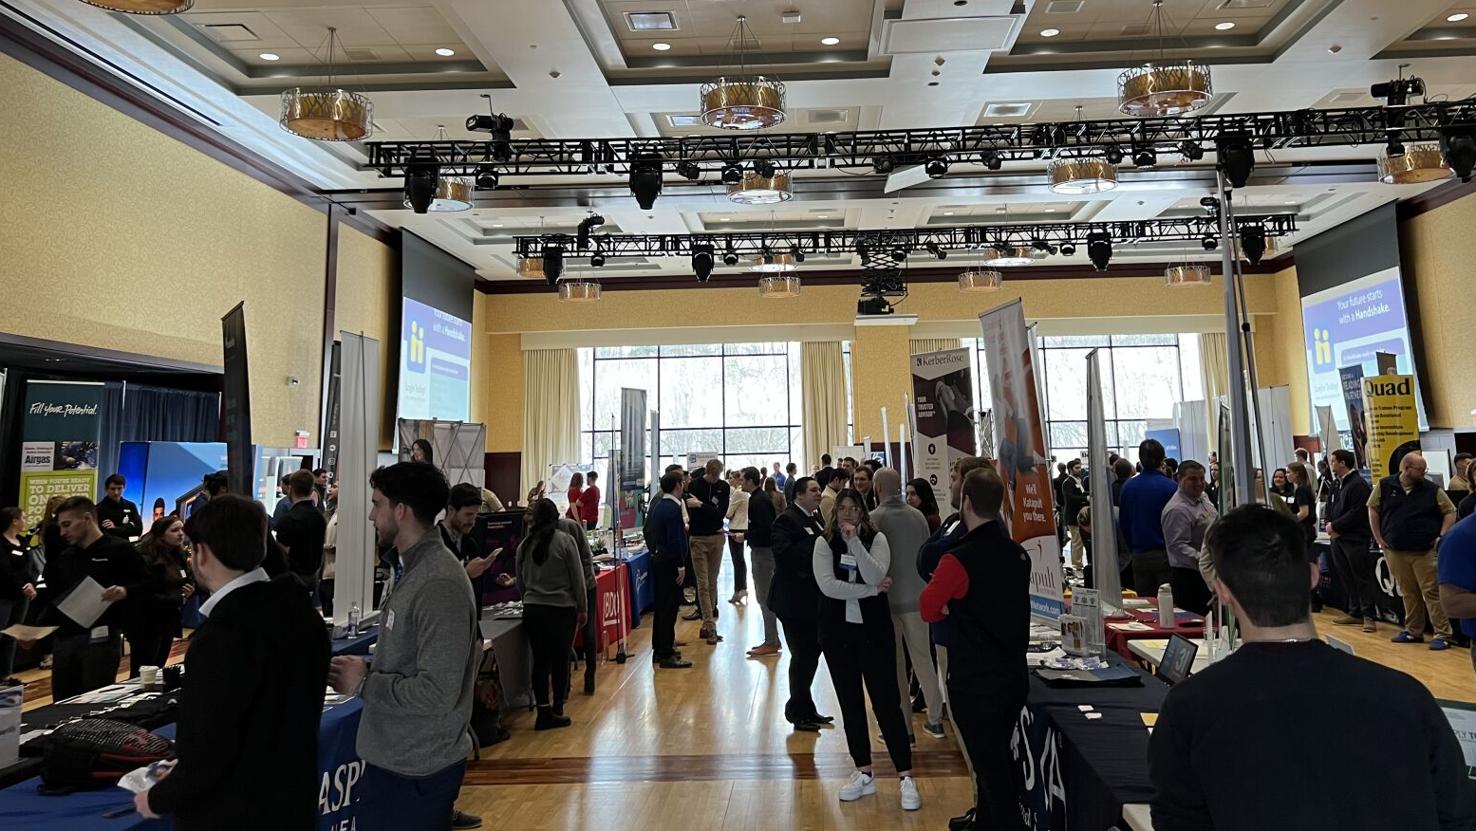 Blugolds look to their career future at annual spring job fair